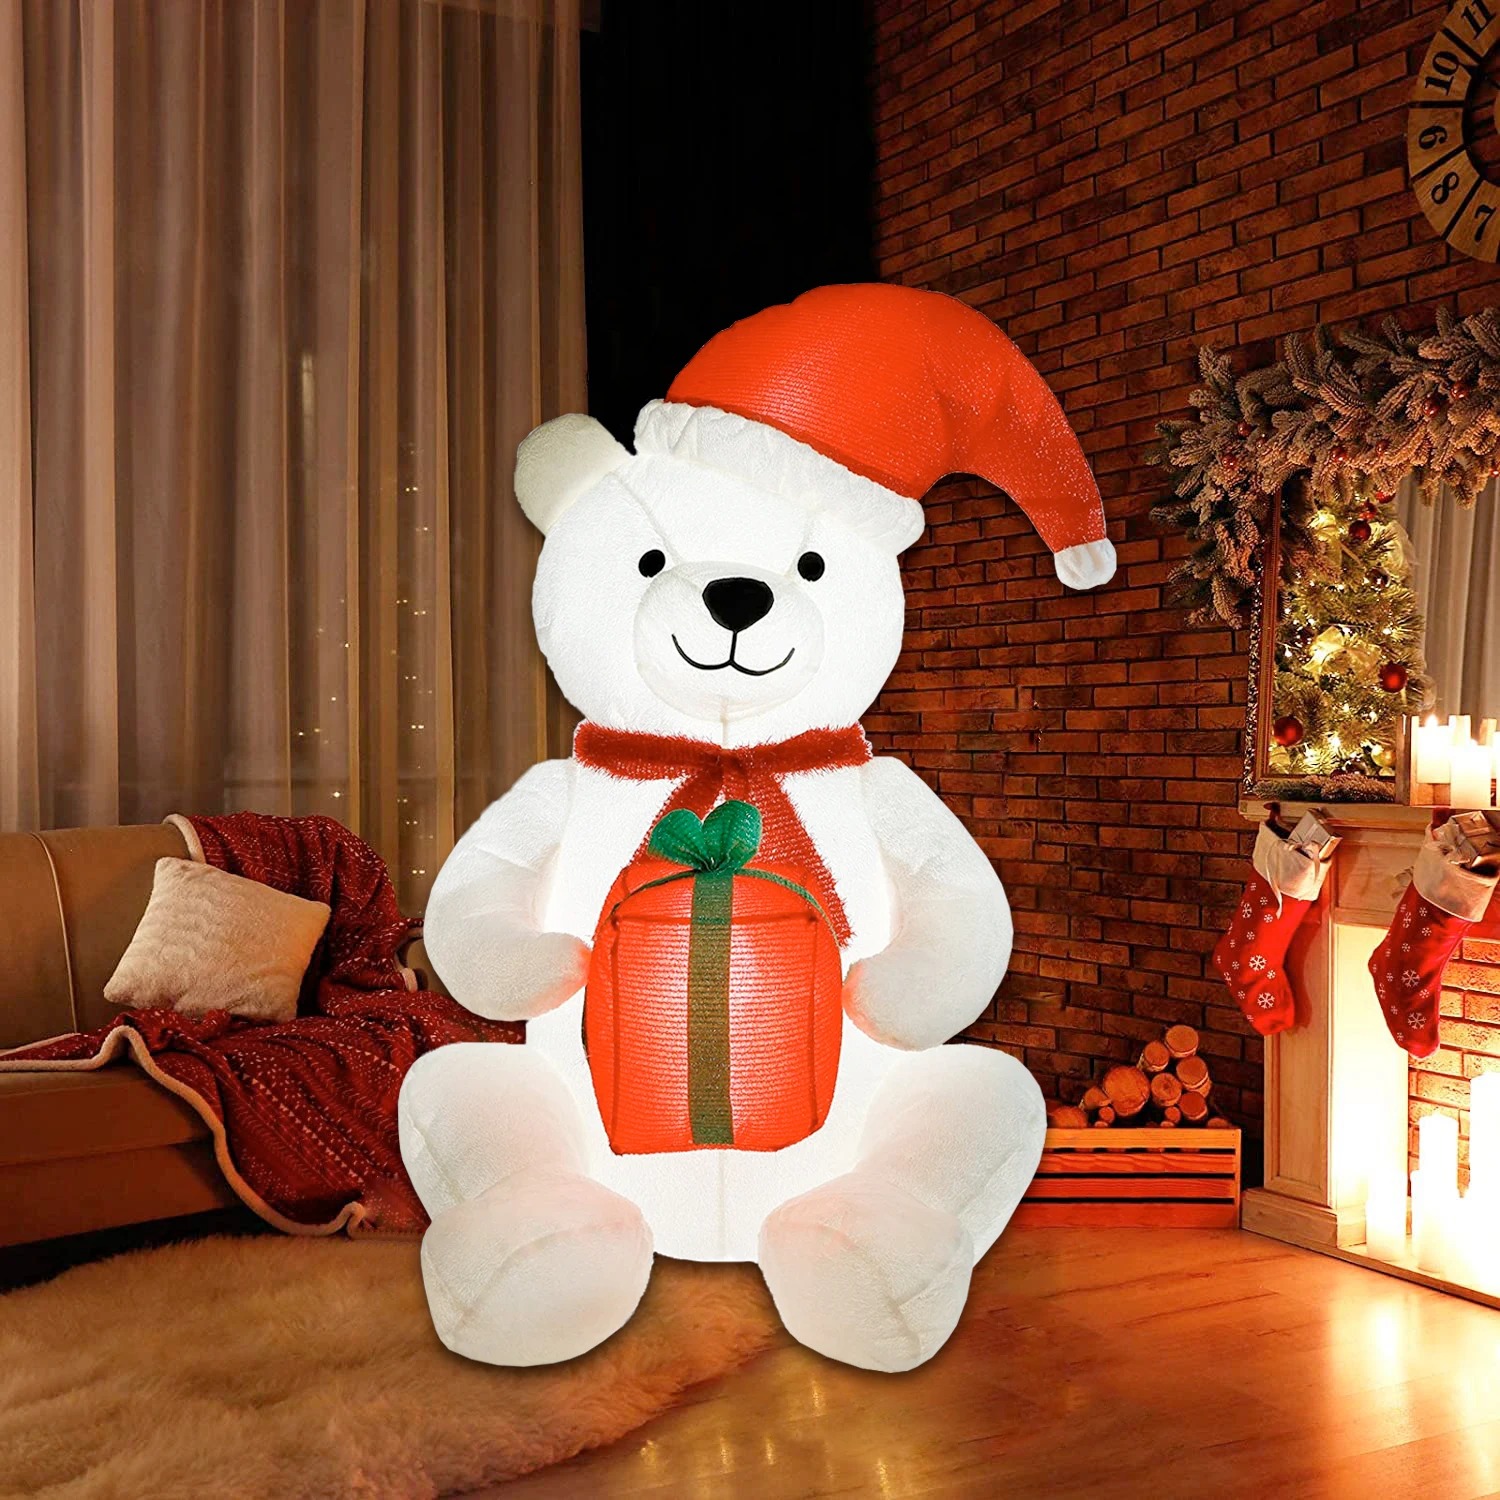 

120cm Polar Bear Inflatable Toys Christmas Decoration LED Lights Inflatable Plush Doll New Year Gift for Kids Xmas Home Ornament